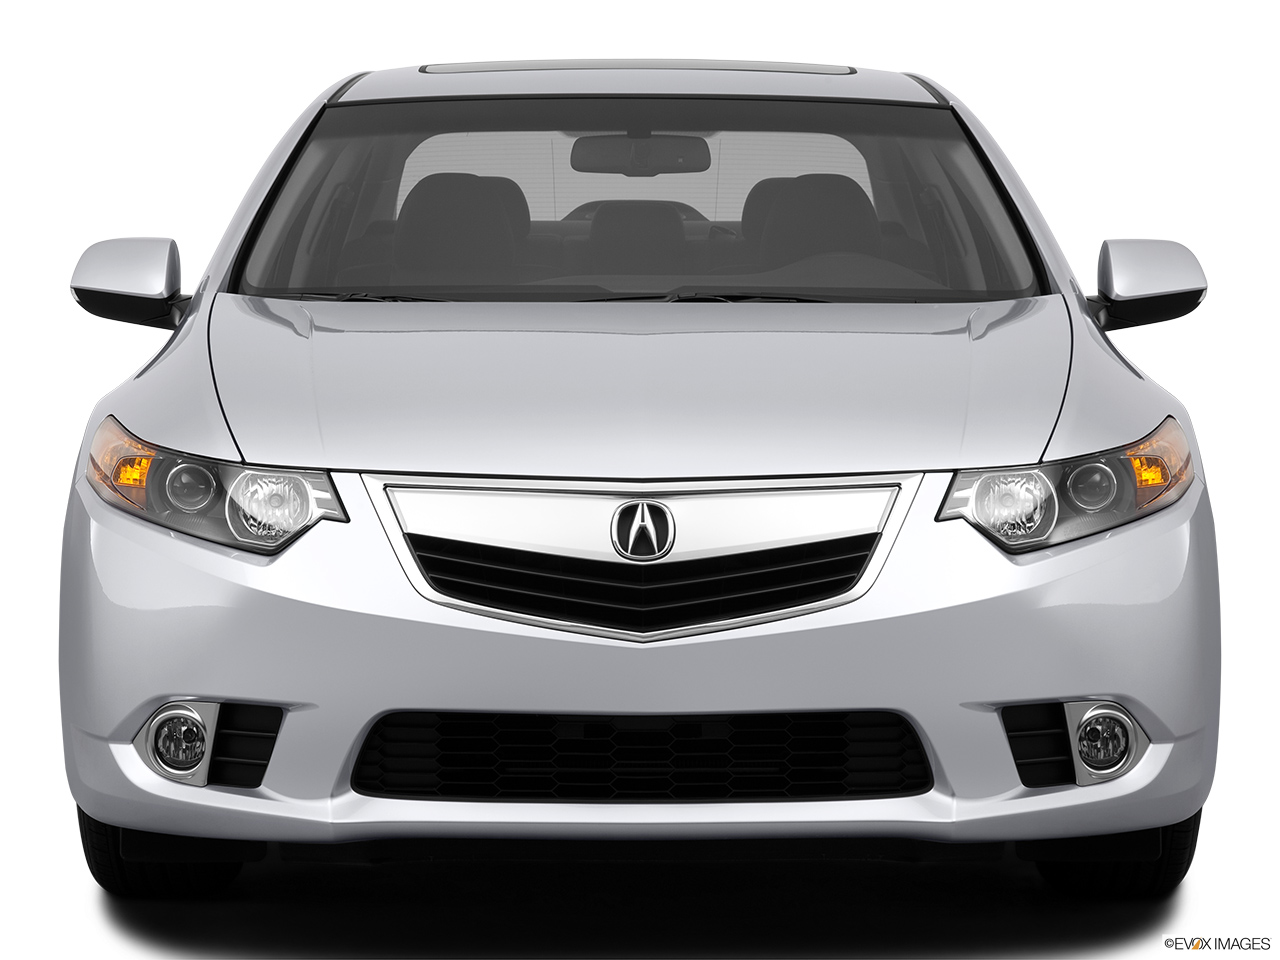 2013 Acura TSX 5-speed Automatic Low/wide front. 